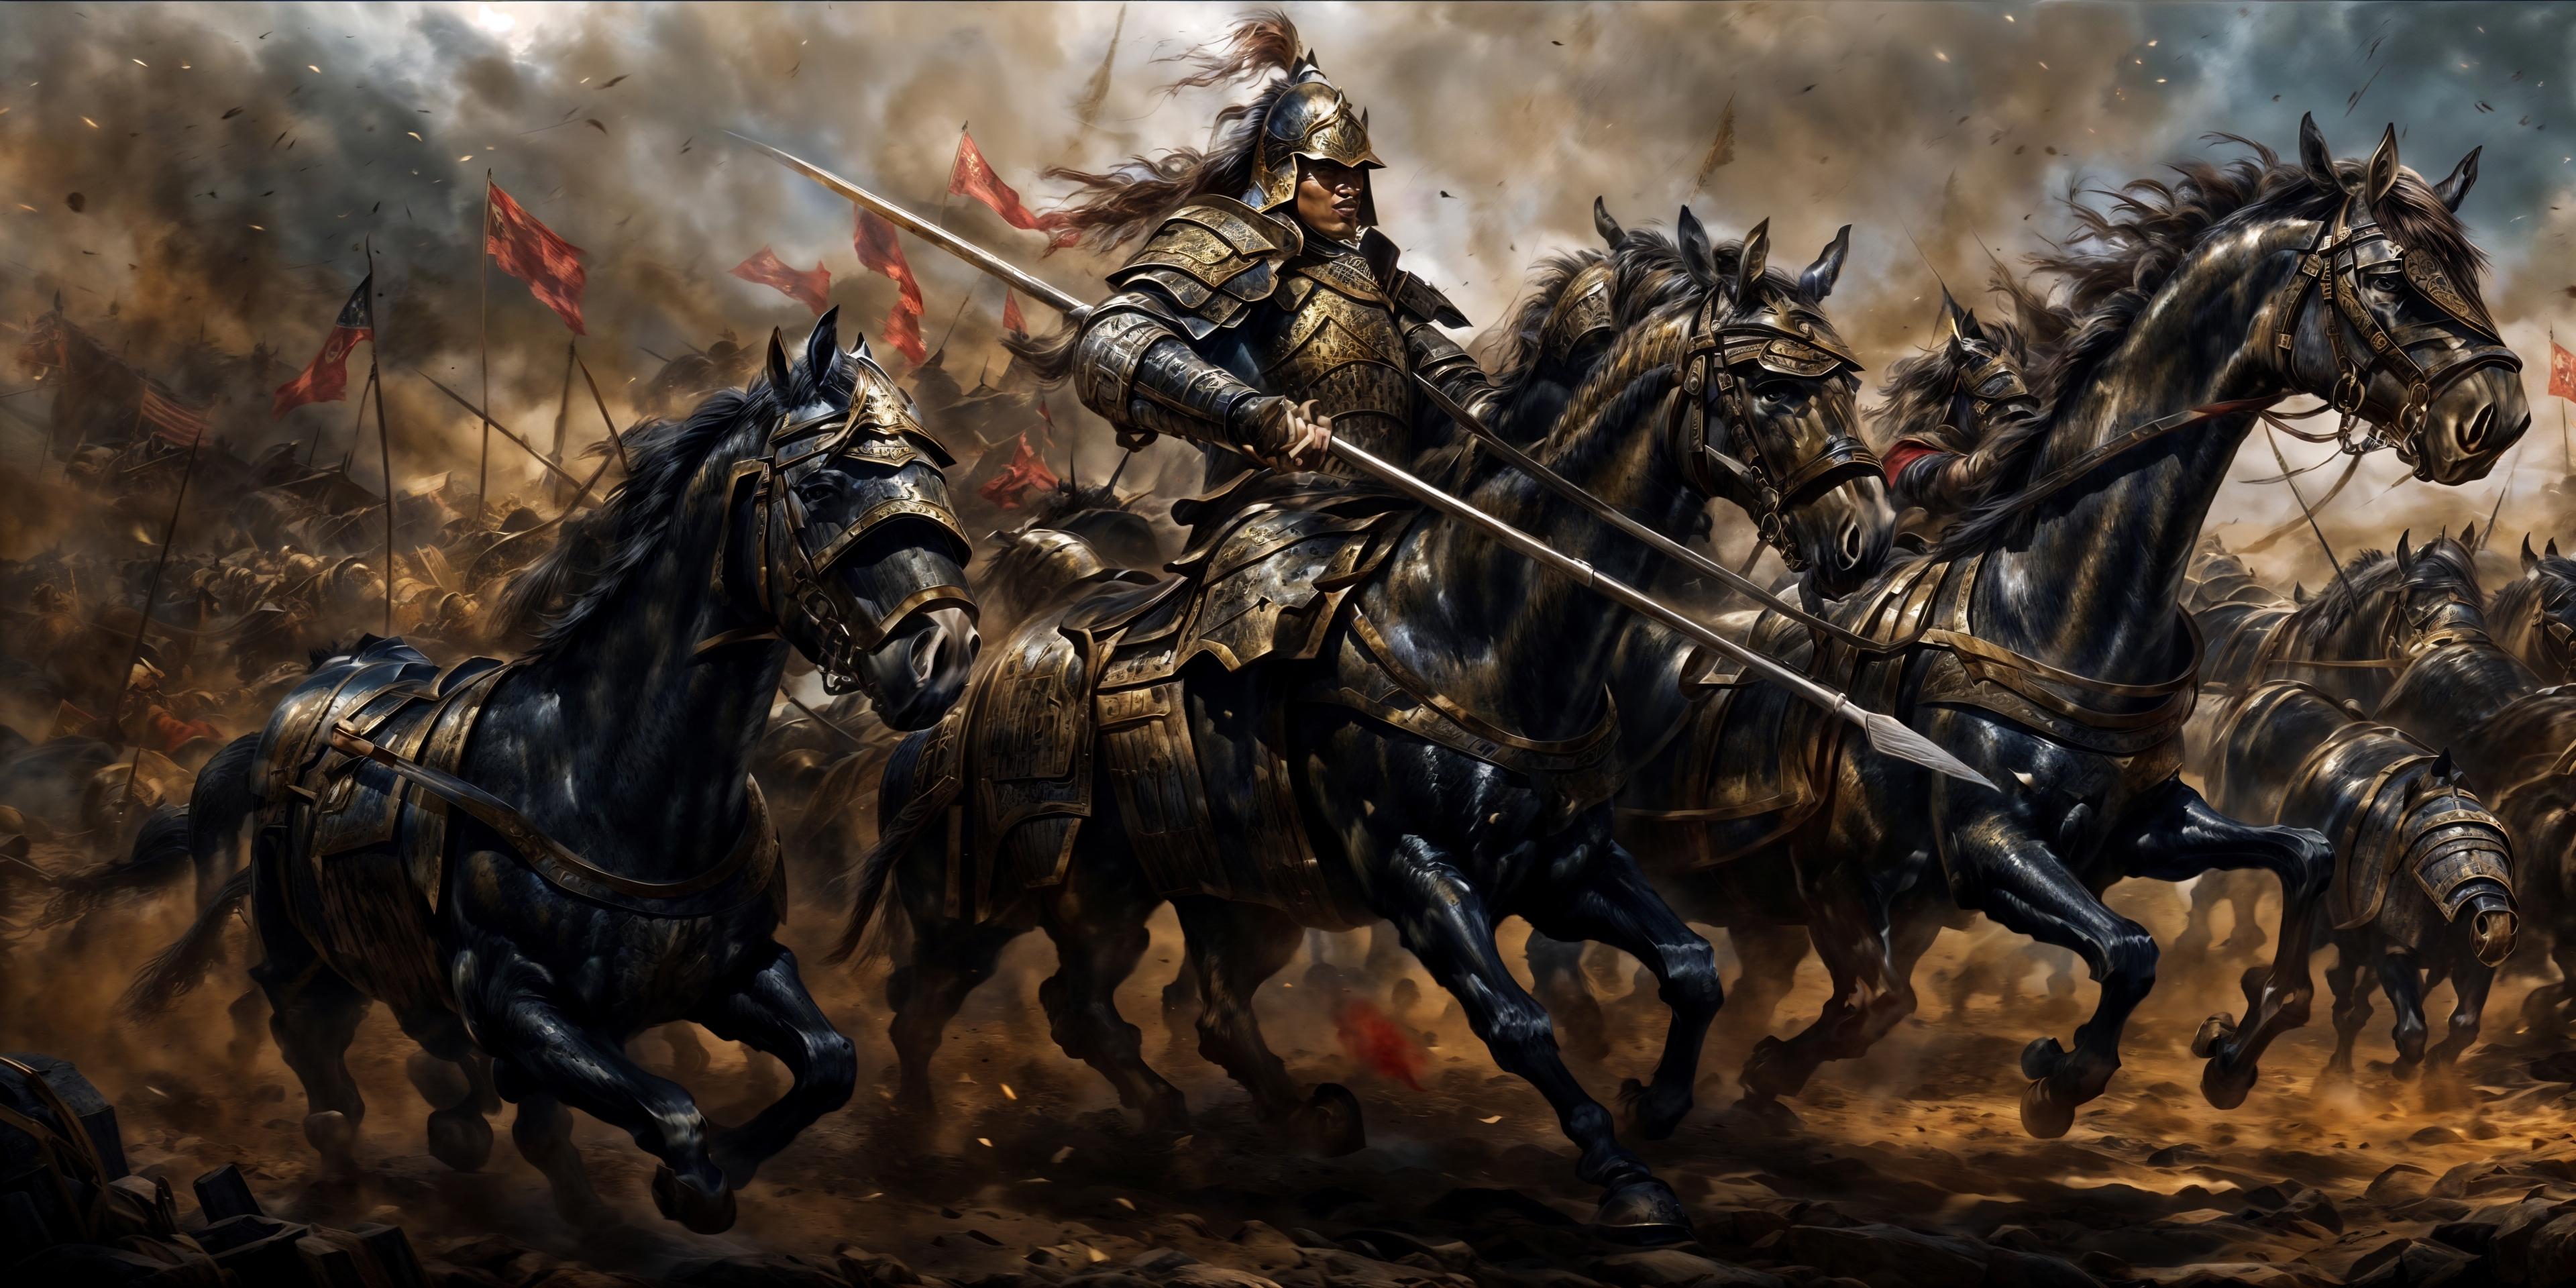 A warrior on a horse with a gold helmet and a sword, surrounded by other horses.